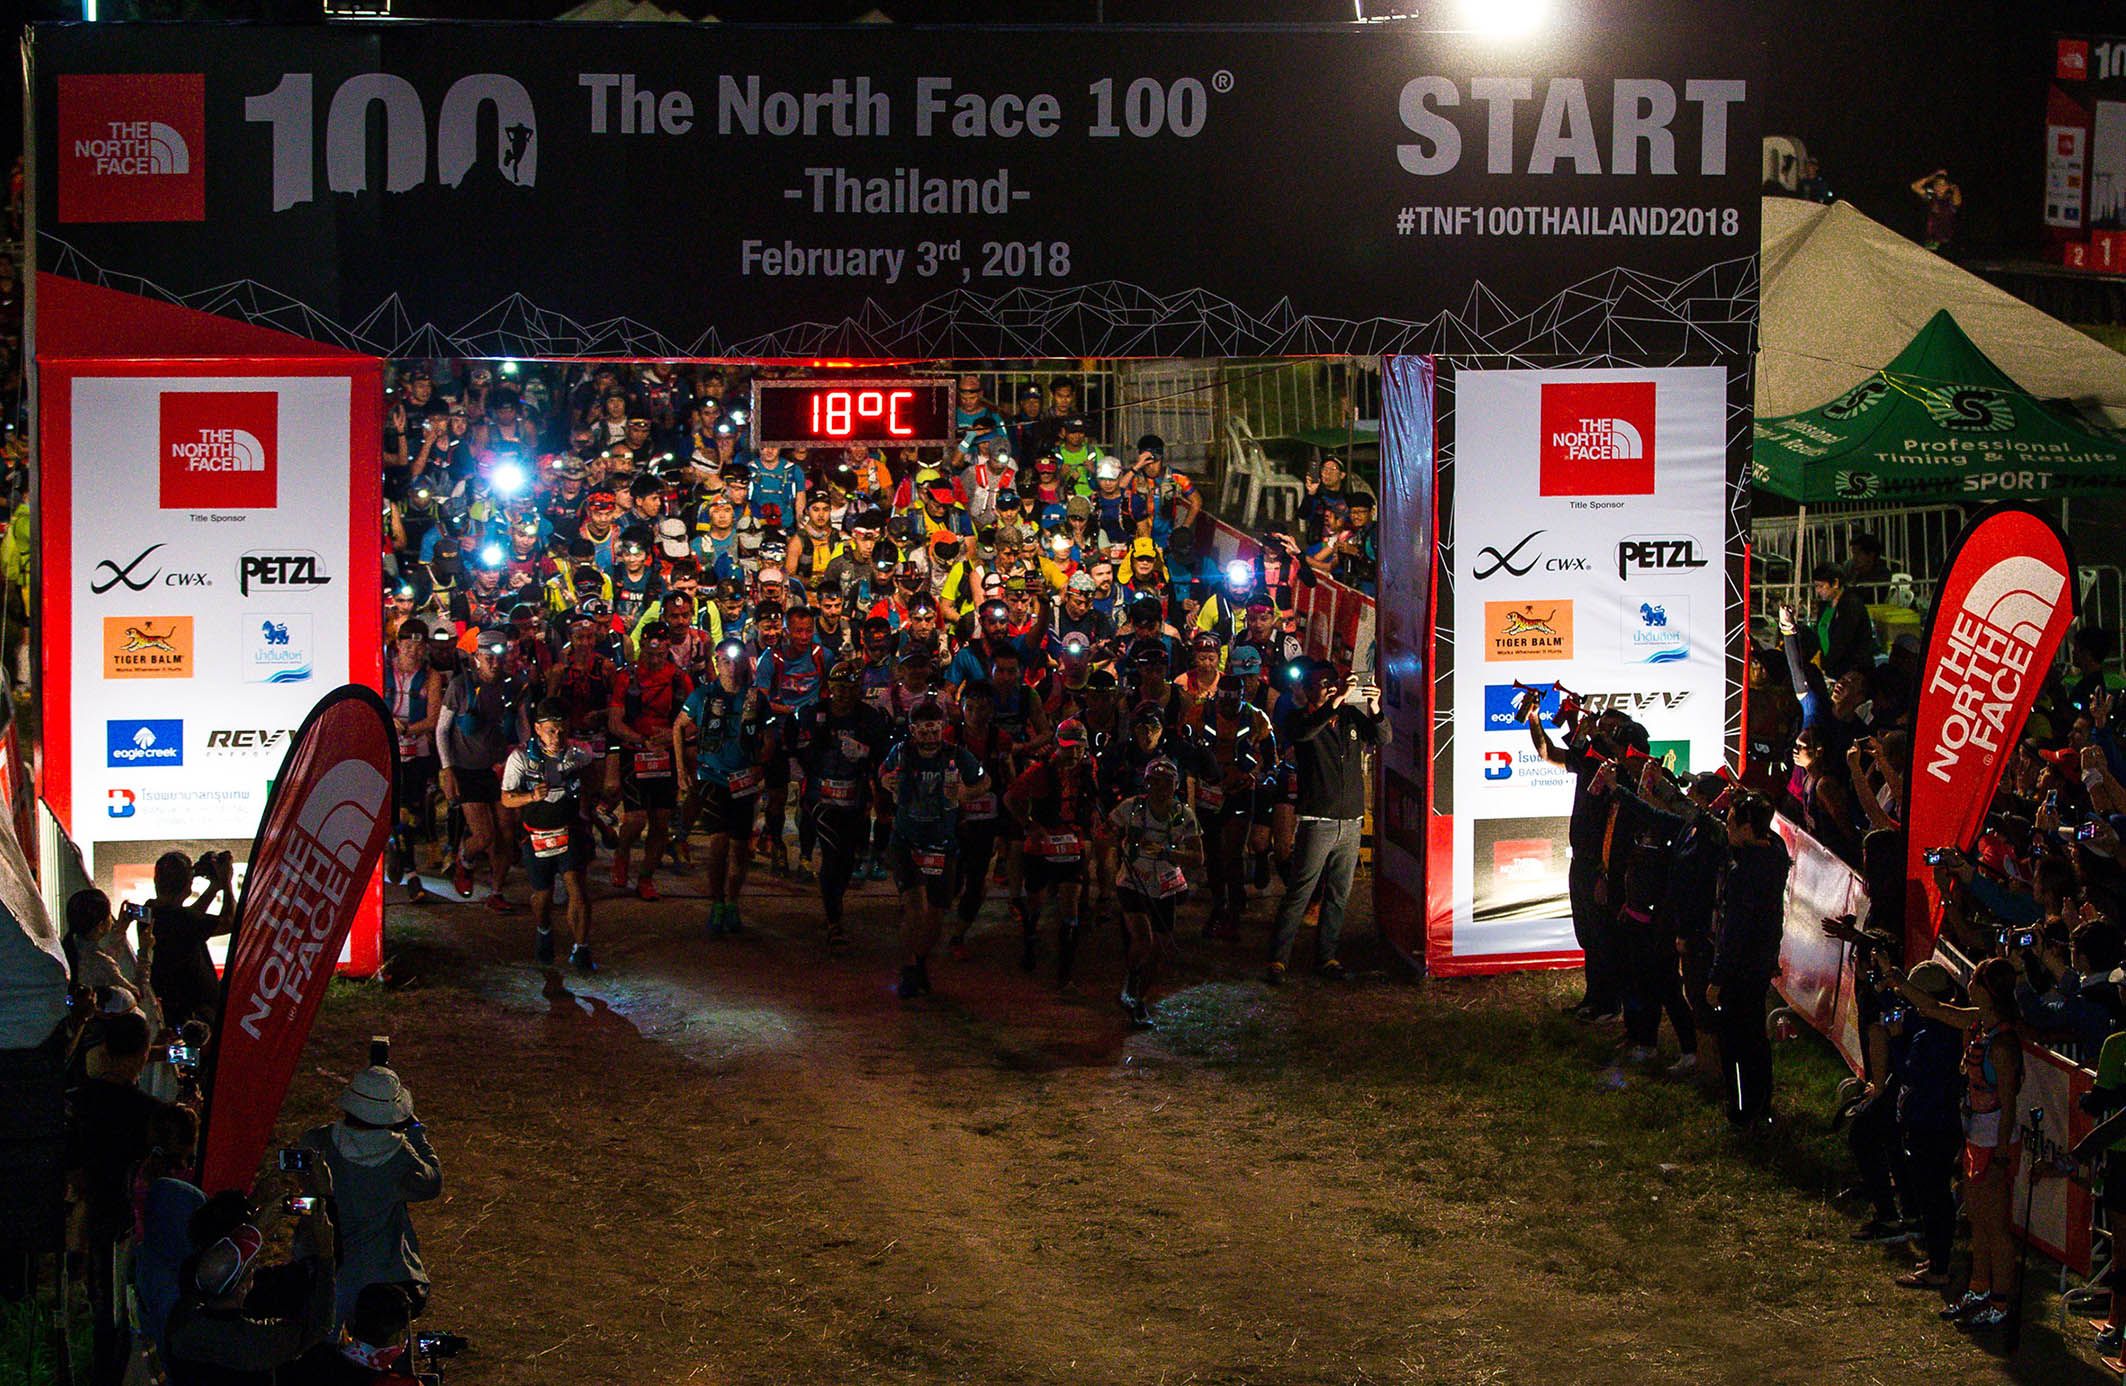 The North Face 100® - Thailand